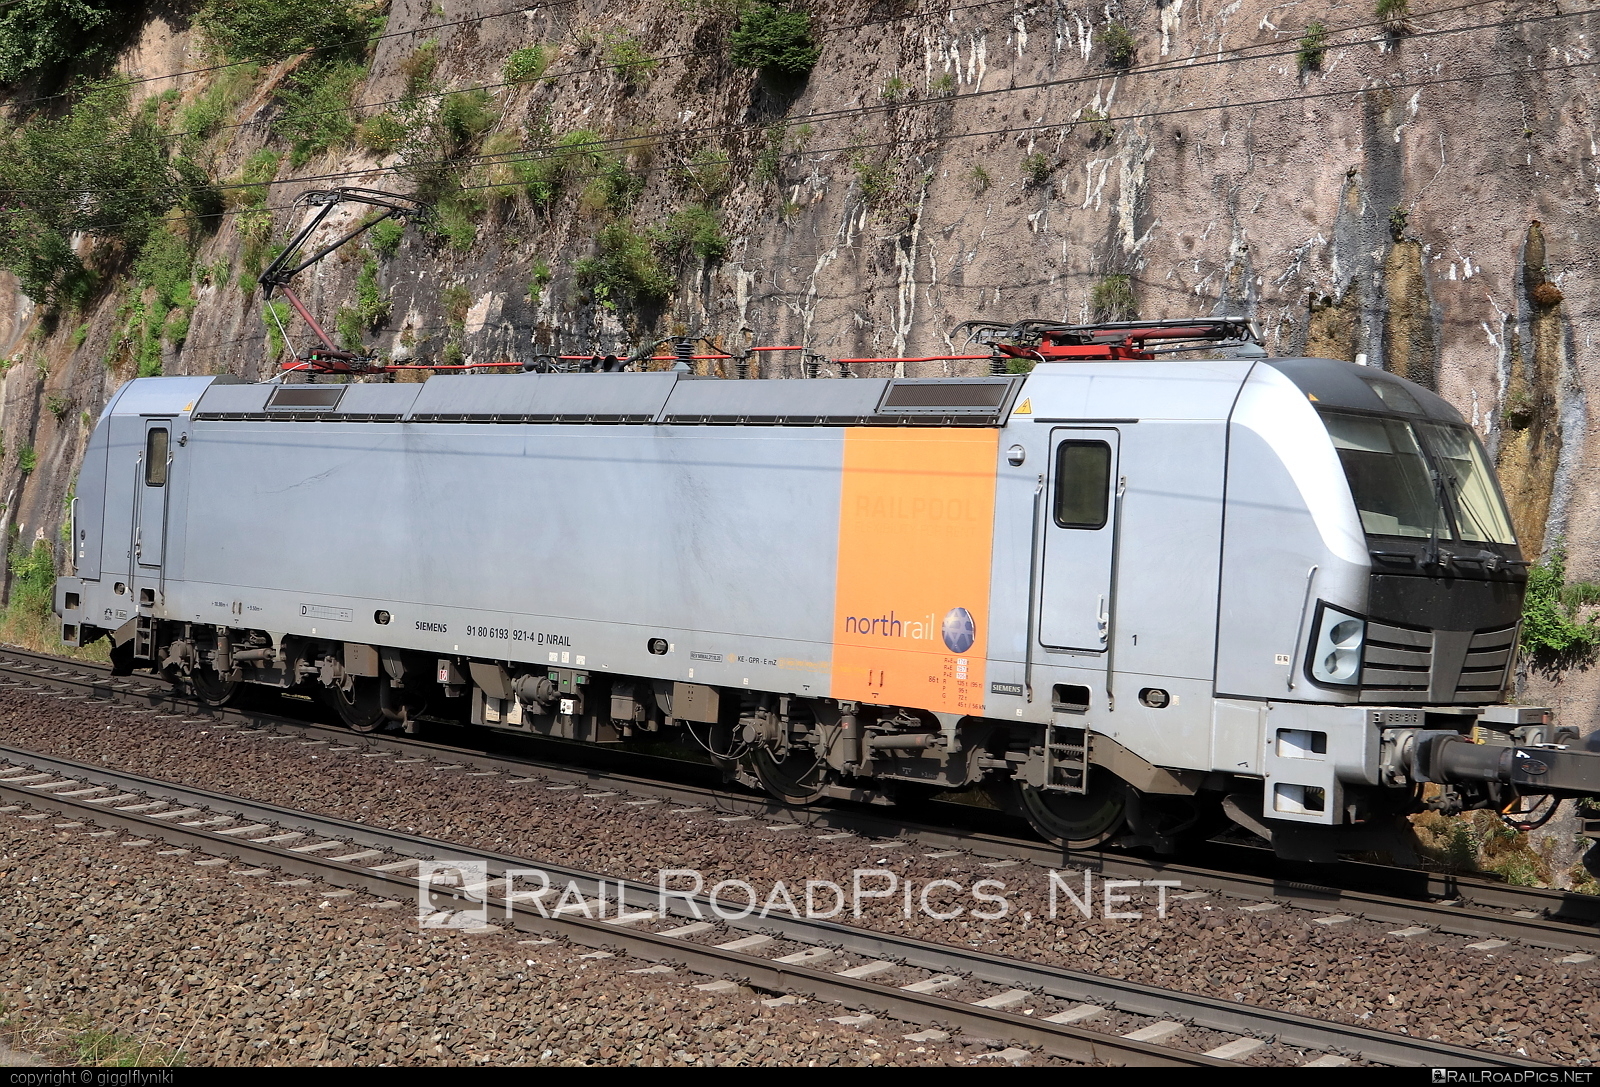 Siemens Vectron AC - 193 921 operated by northrail Faahrzeugverwaltungs GmbH #northrail #northrailFaahrzeugverwaltungsGmbH #nrail #siemens #siemensVectron #siemensVectronAC #vectron #vectronAC